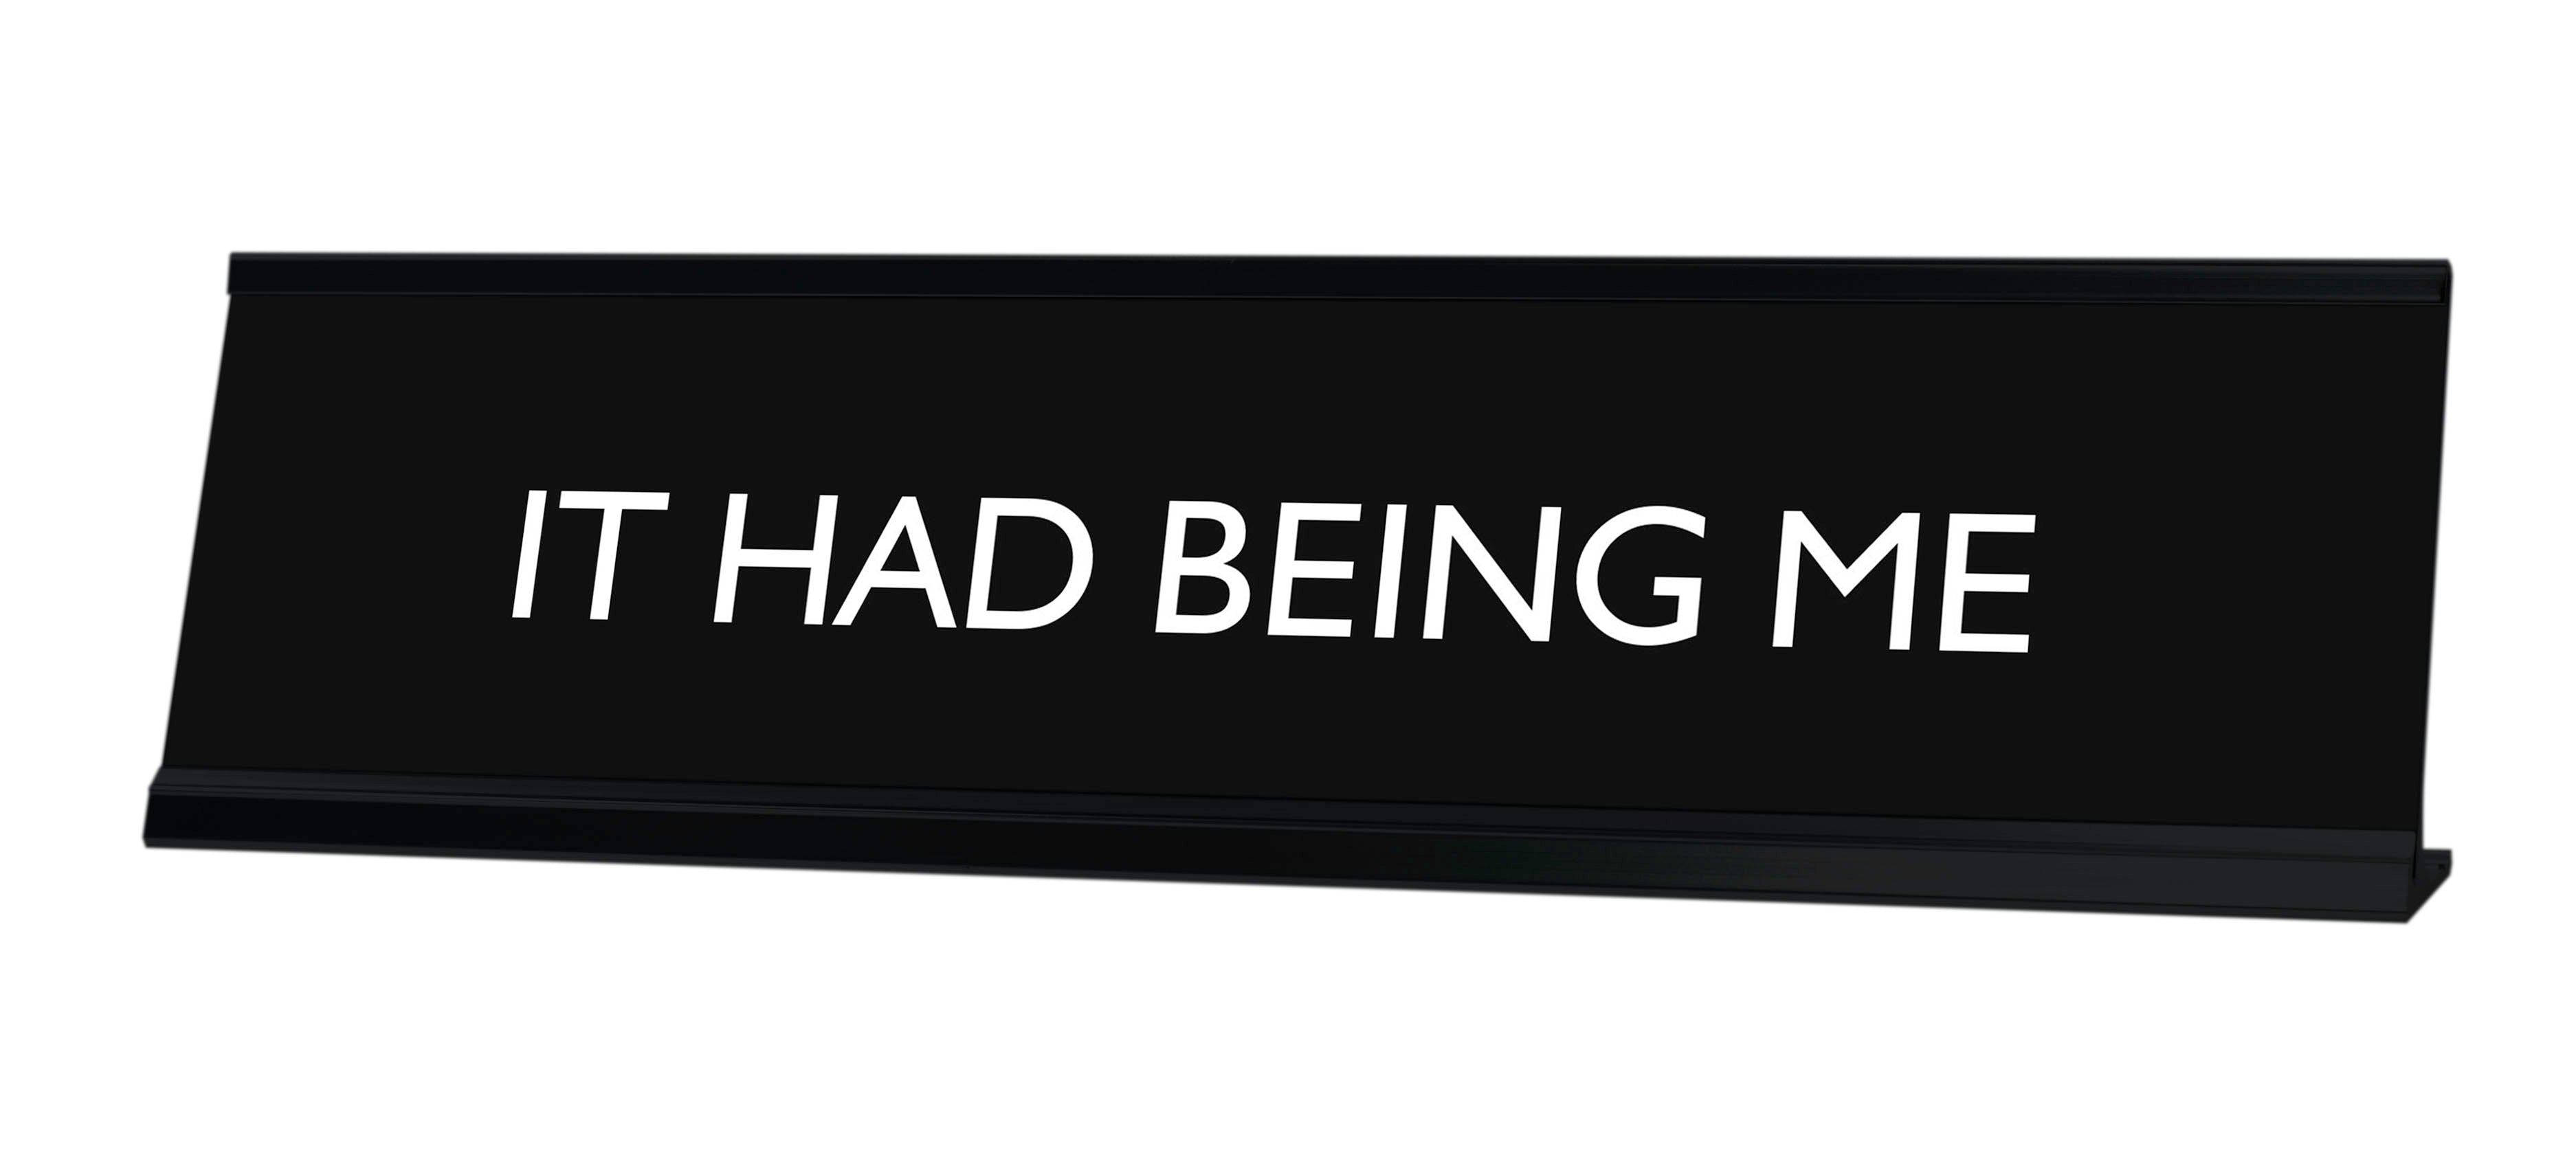 IT HAD BEING ME Novelty Desk Sign